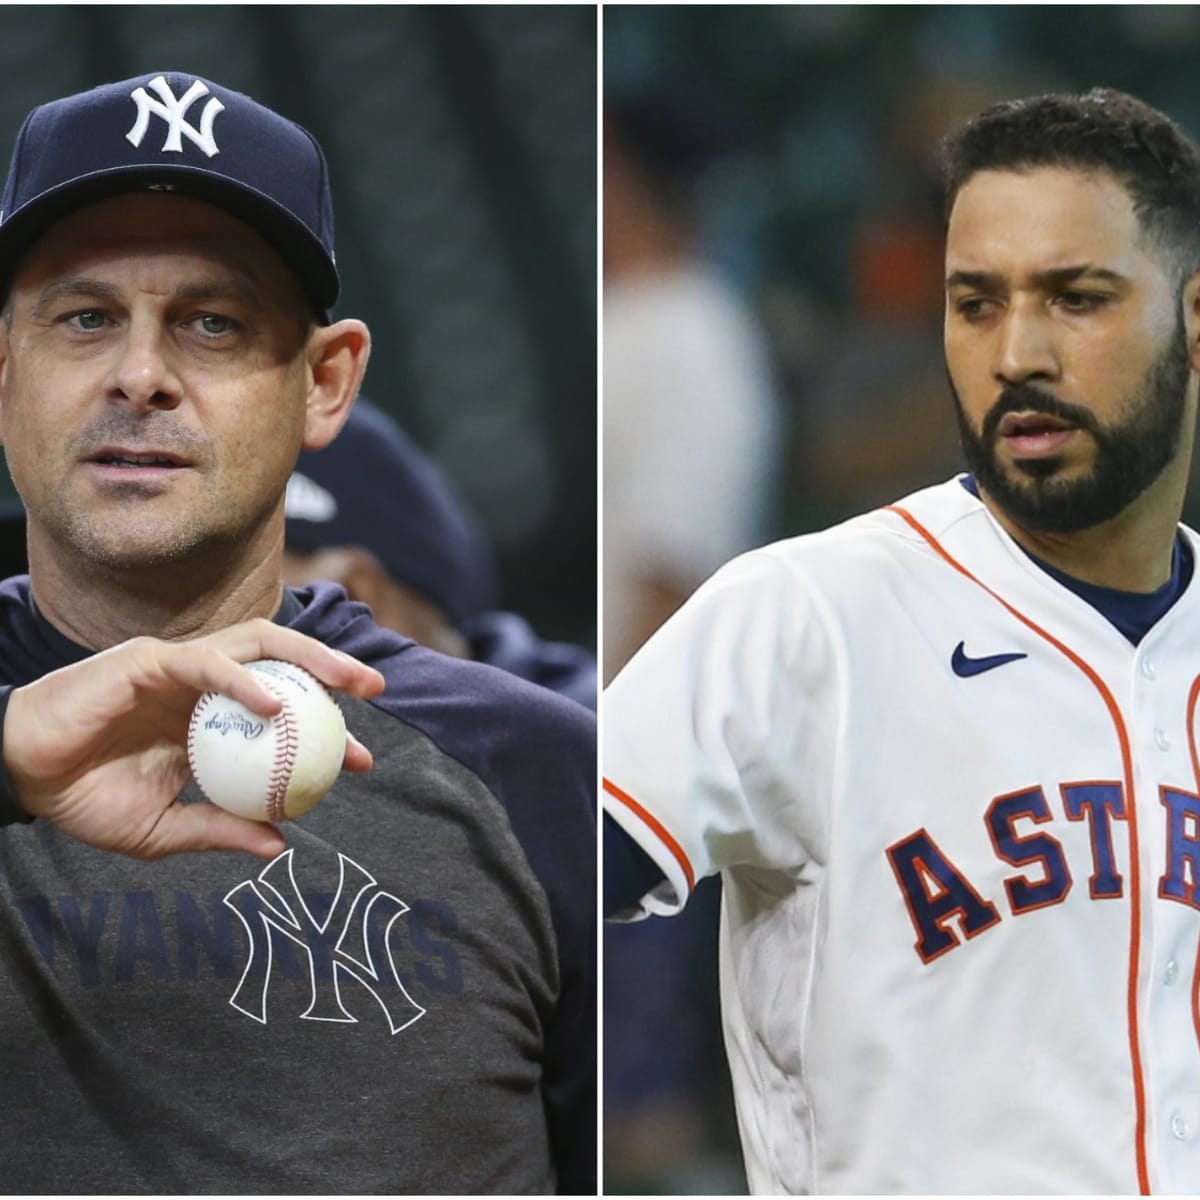 Marwin Gonzalez on Astros cheating scandal: 'Wish we could take it back